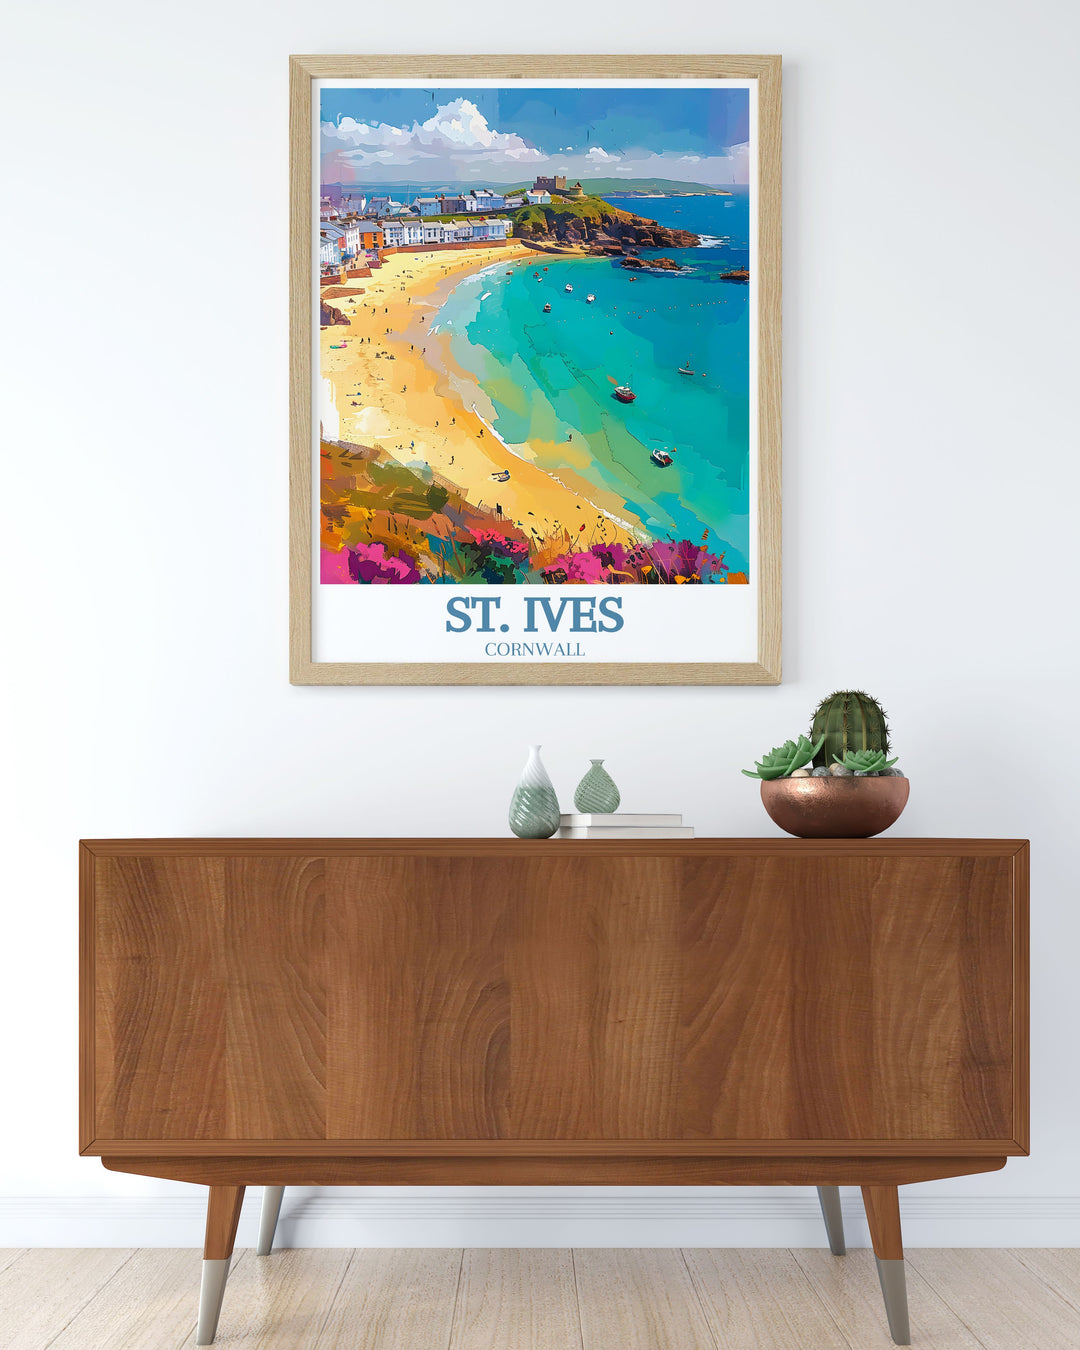 This vintage inspired poster of St. Ives captures the essence of its coastal beauty and cultural significance, offering a glimpse into one of Cornwalls most picturesque destinations.